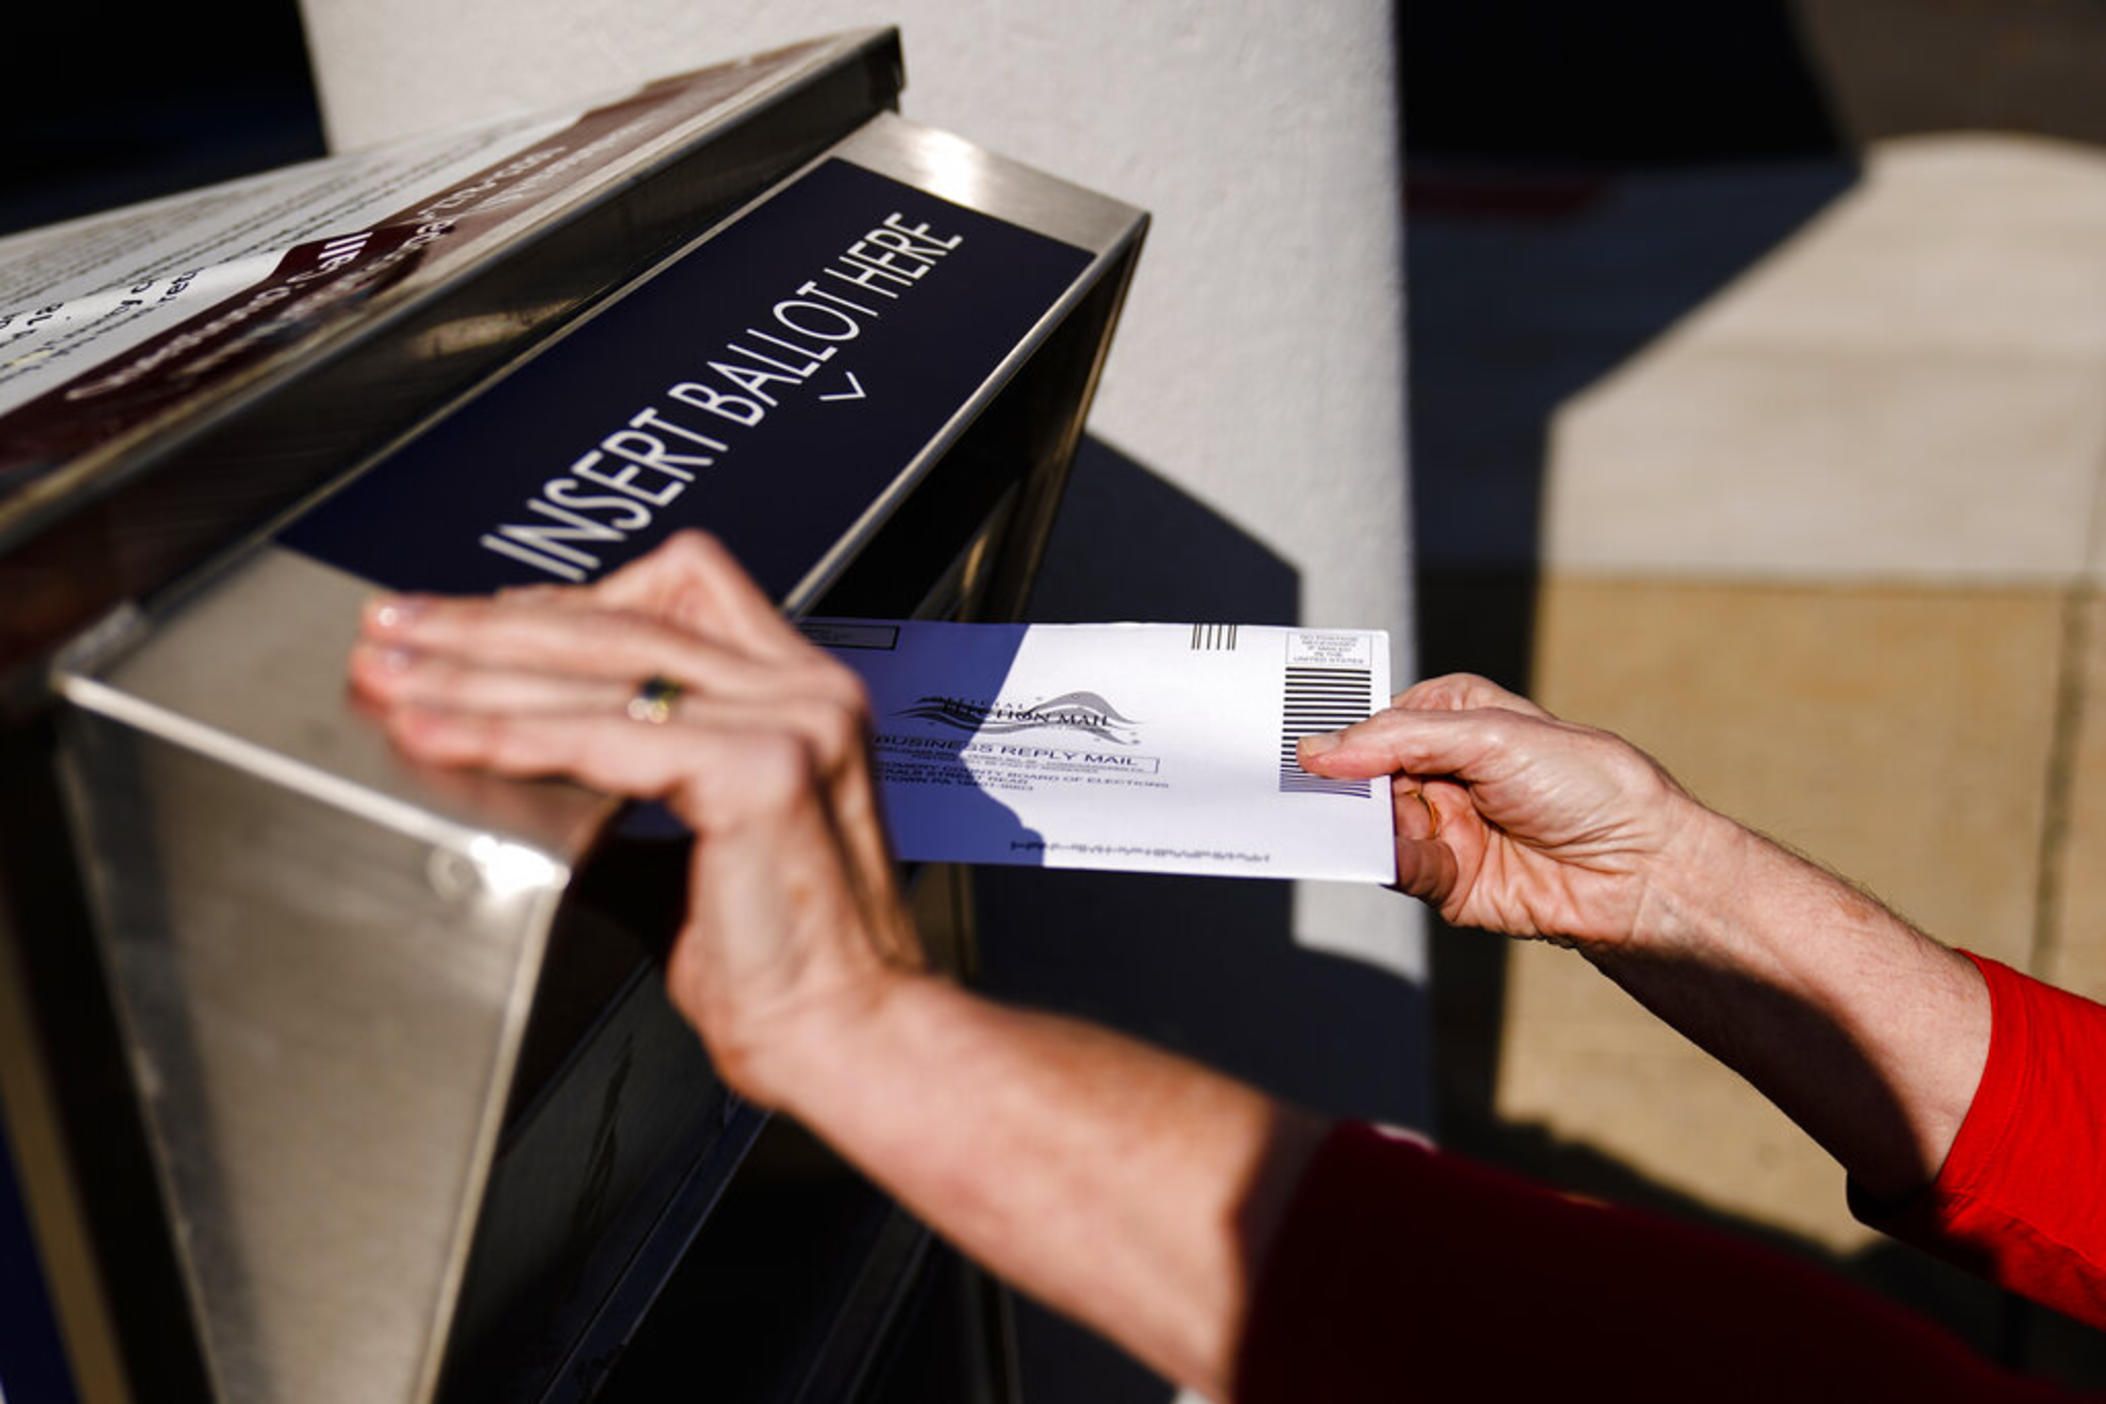 A person drops off a mail-in ballot at an election ballot return box in Willow Grove, Pa., Oct. 25, 2021. On Tuesday, May 3, 2022, The Associated Press reported on a film that used a flawed analysis of cellphone location data and ballot drop box surveillance footage to cast doubt on the results of the 2020 presidential election. 